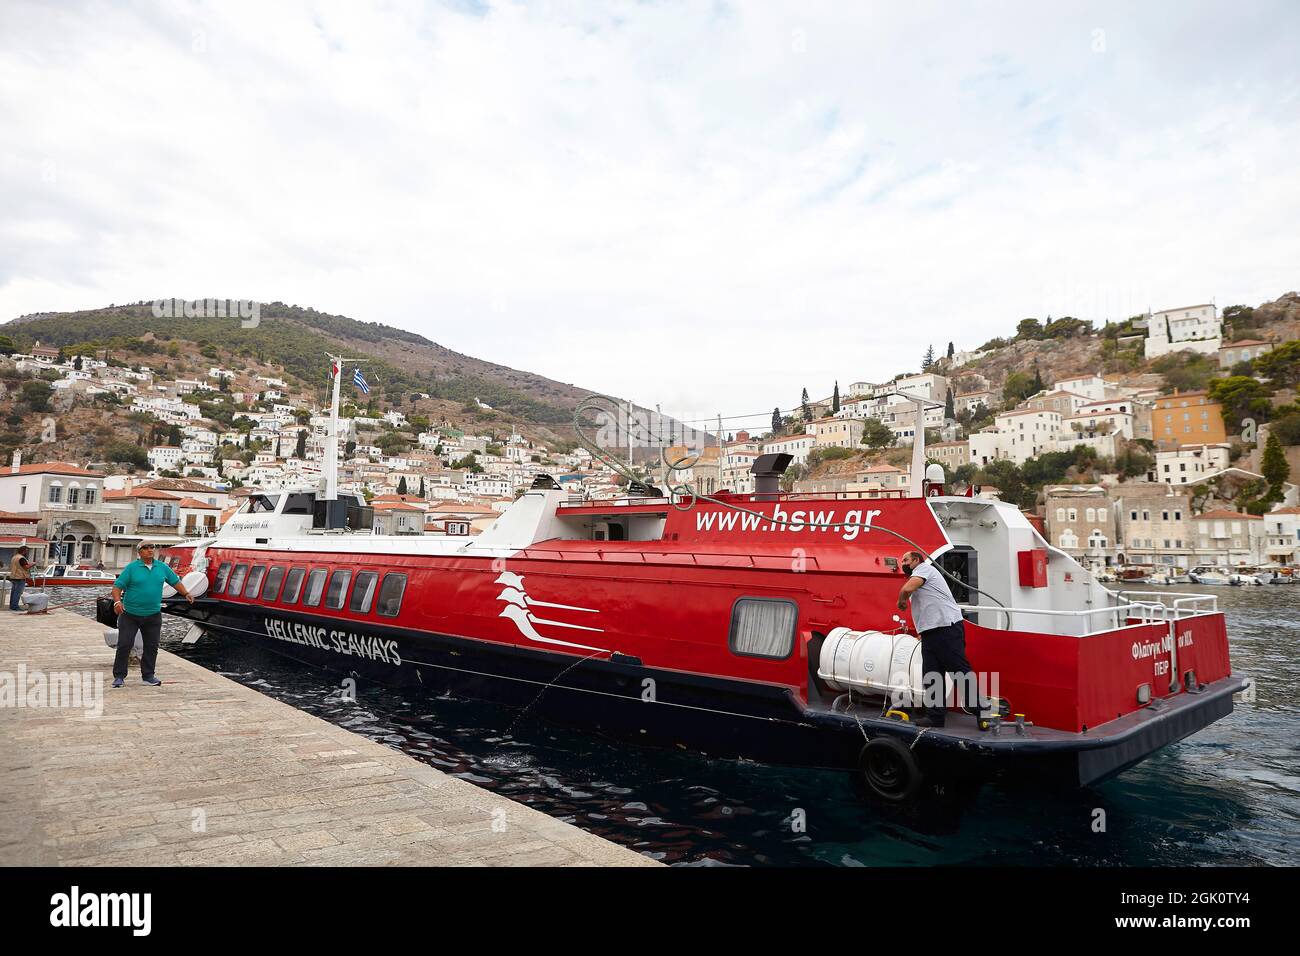 Hellenic seaways boat  arrives at the port of Hydra Greece Stock Photo